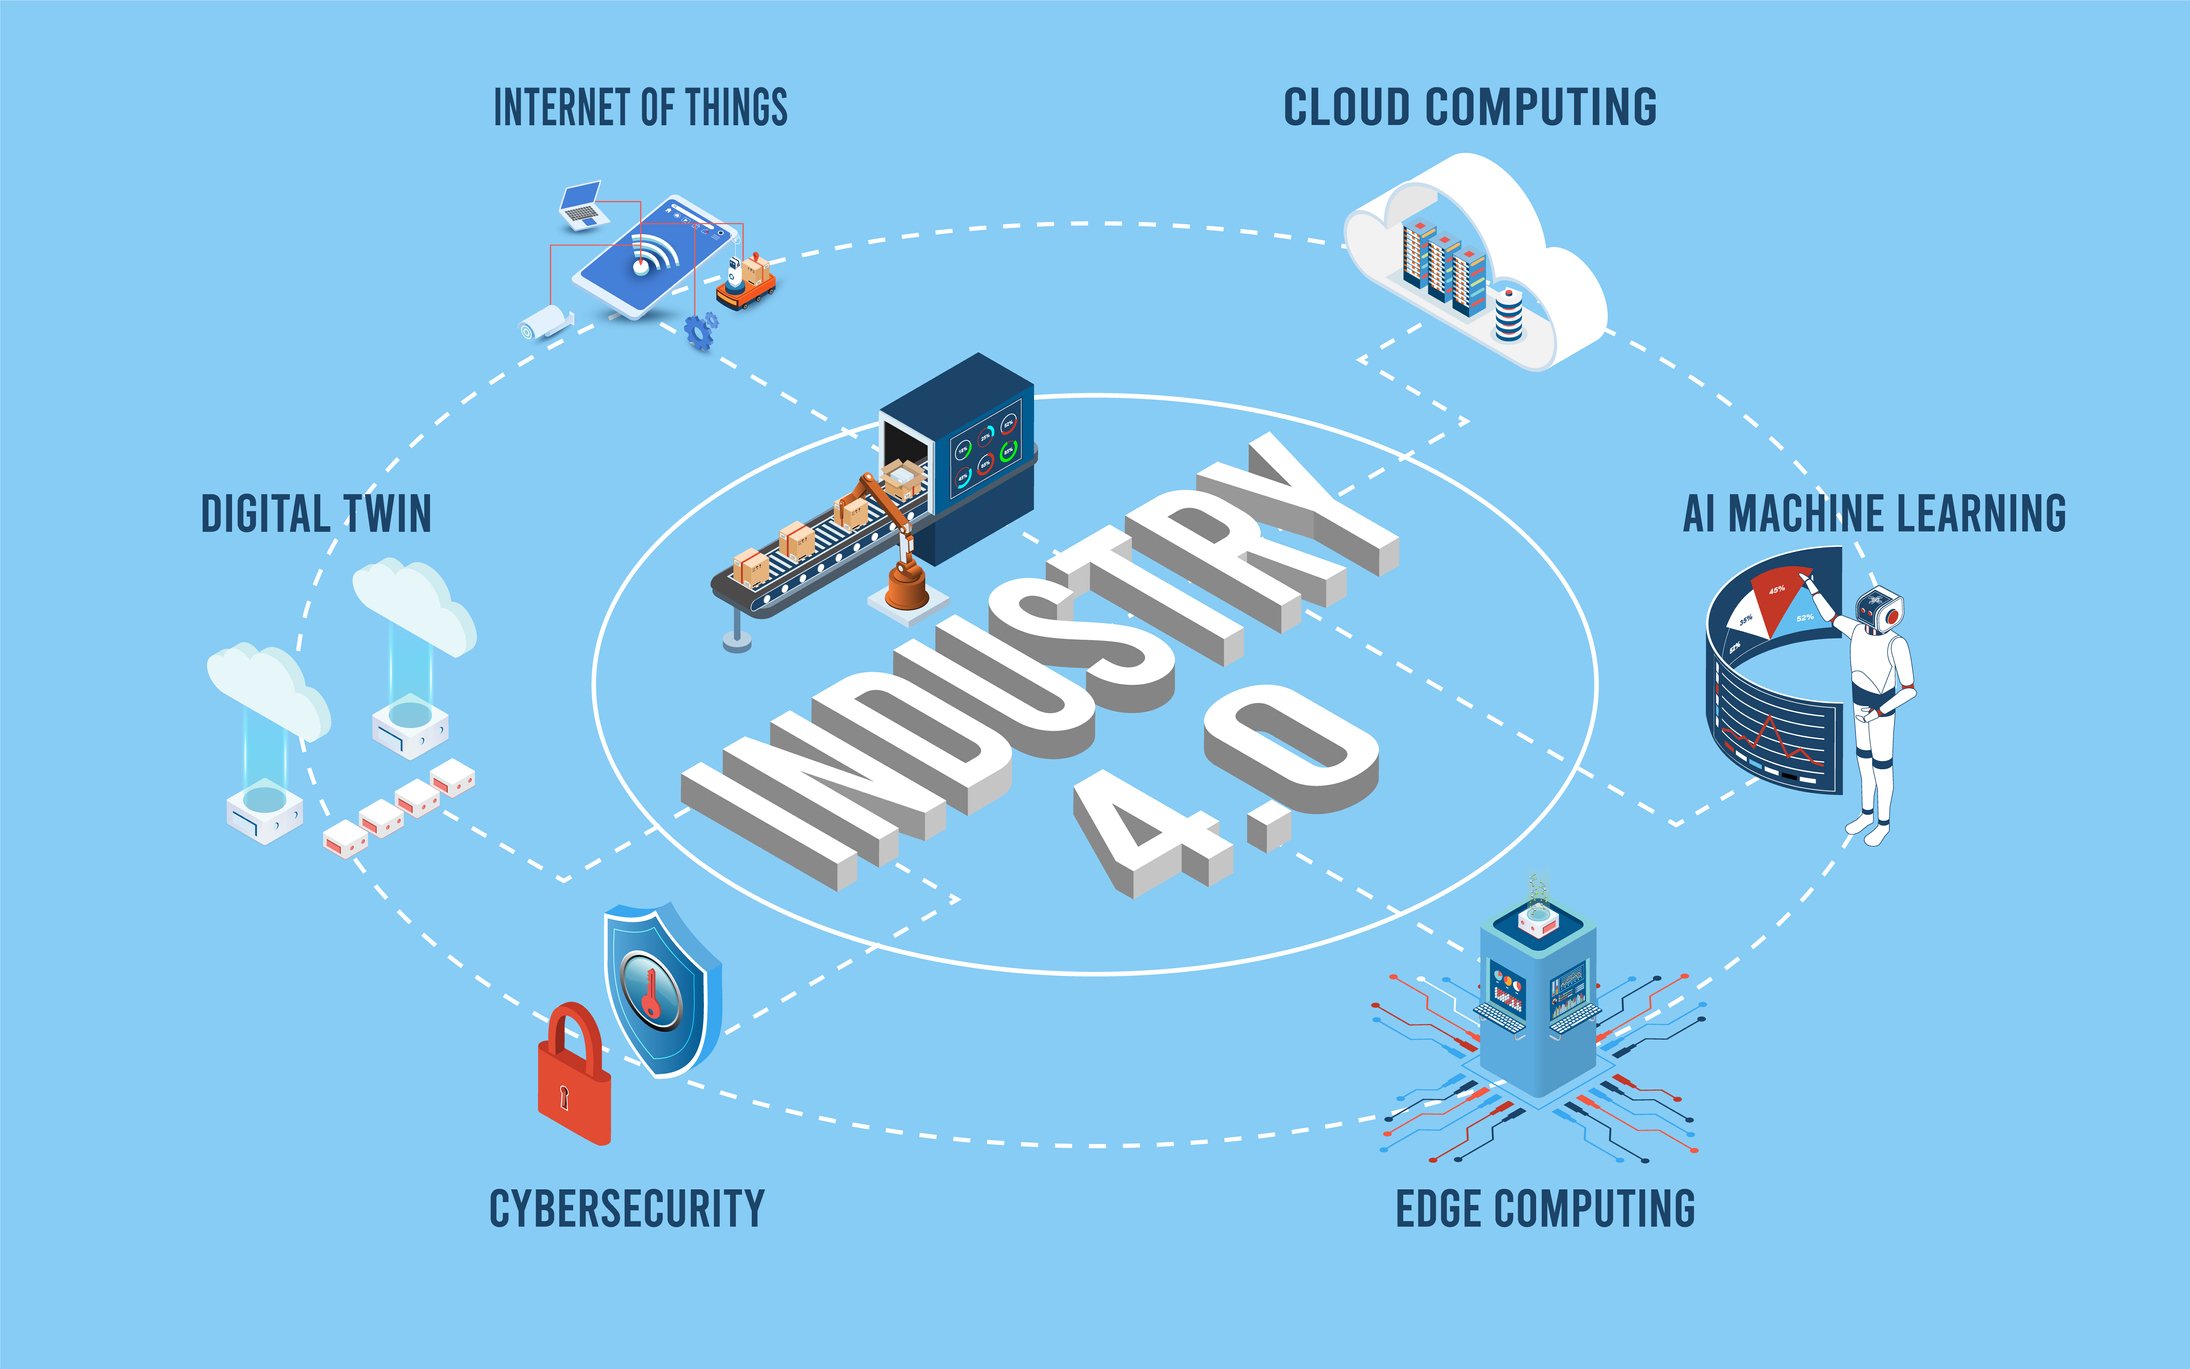 Cracking the Code Pt 4: MFA and Industry 4.0 - Defending the Manufacturing Floor